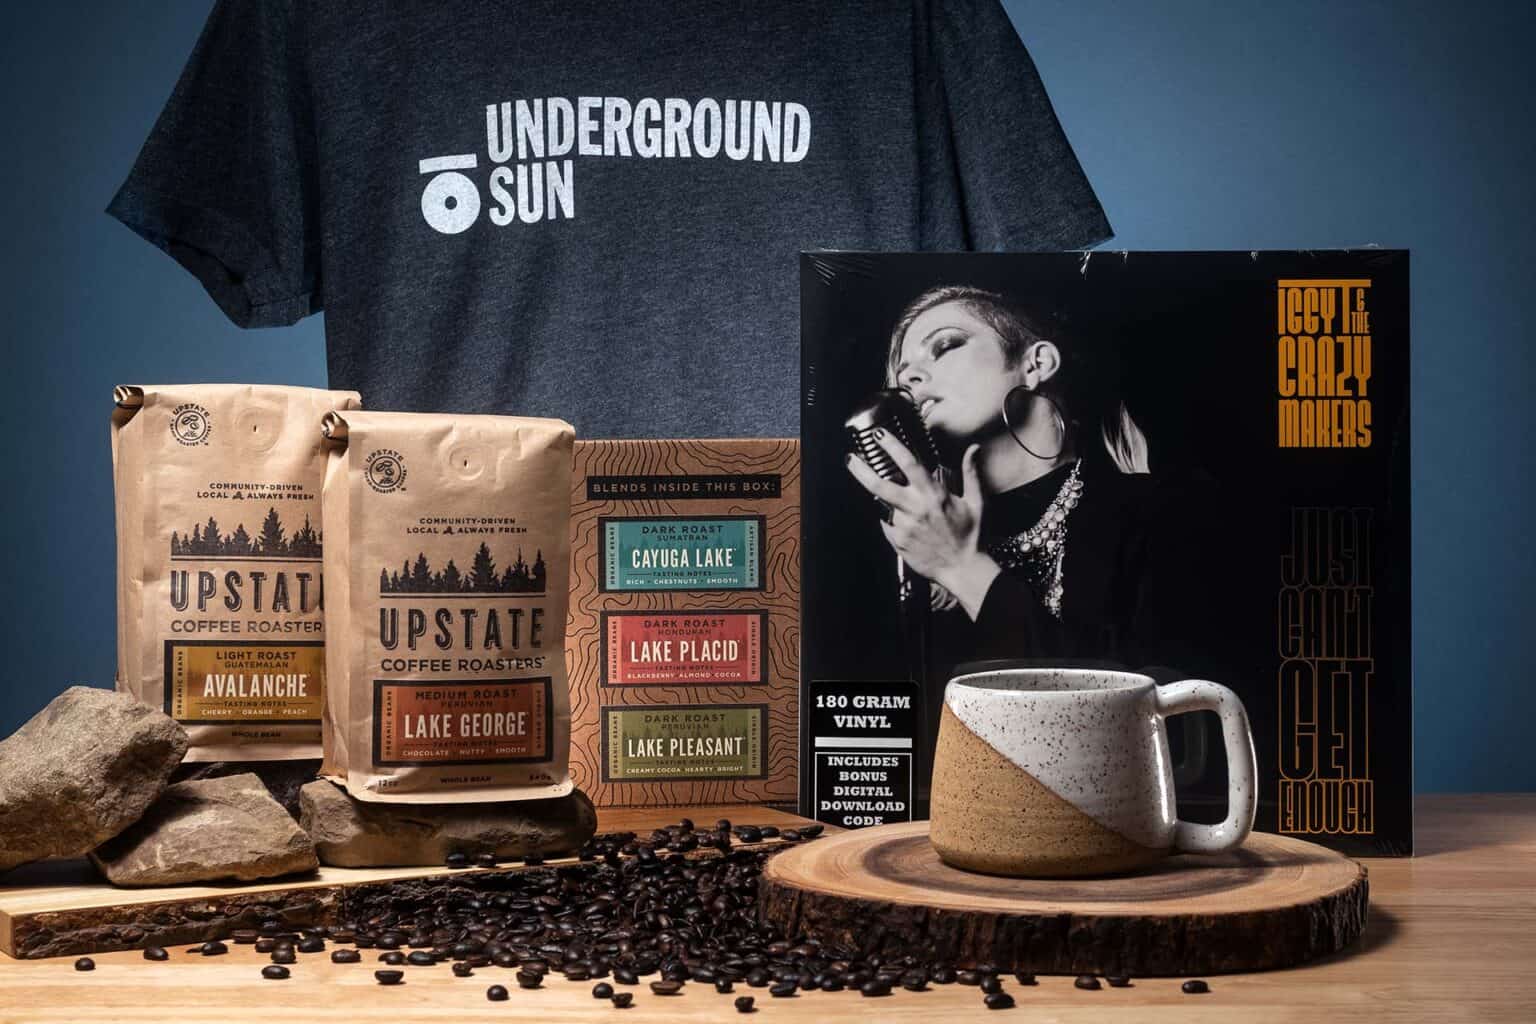 Bags of coffee, a vinyl record, and a t-shirt with the Underground Sun logo.